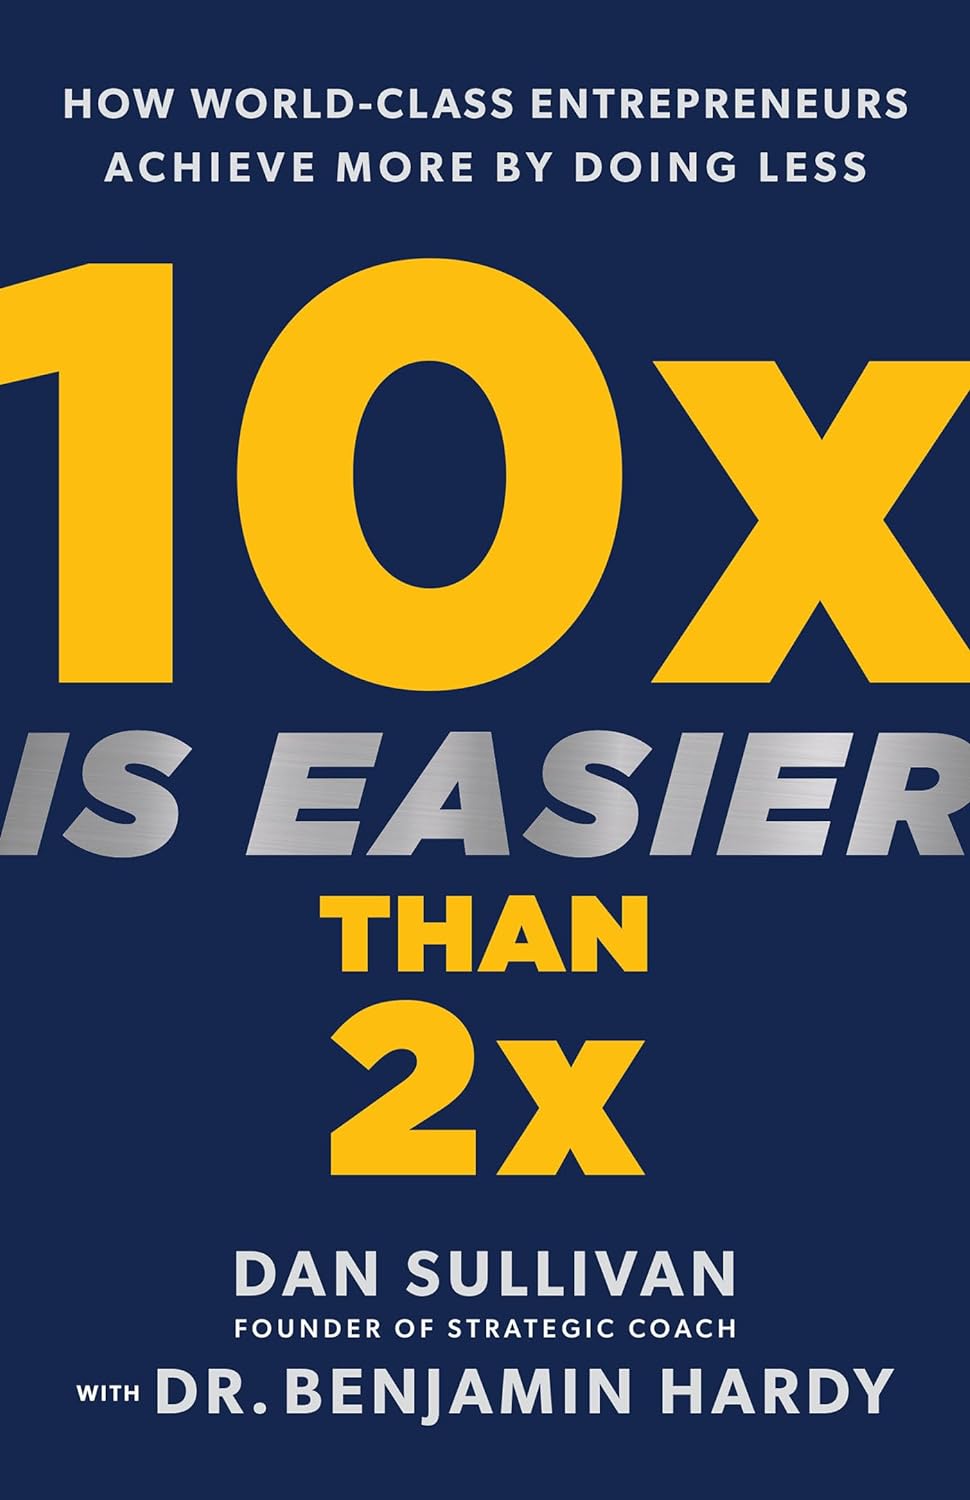 Dan Sullivan with _ Dr. Benjamin Hardy - 10x Is Easier Than 2x. How World-Class Entrepreneurs Achieve More by Doing Less